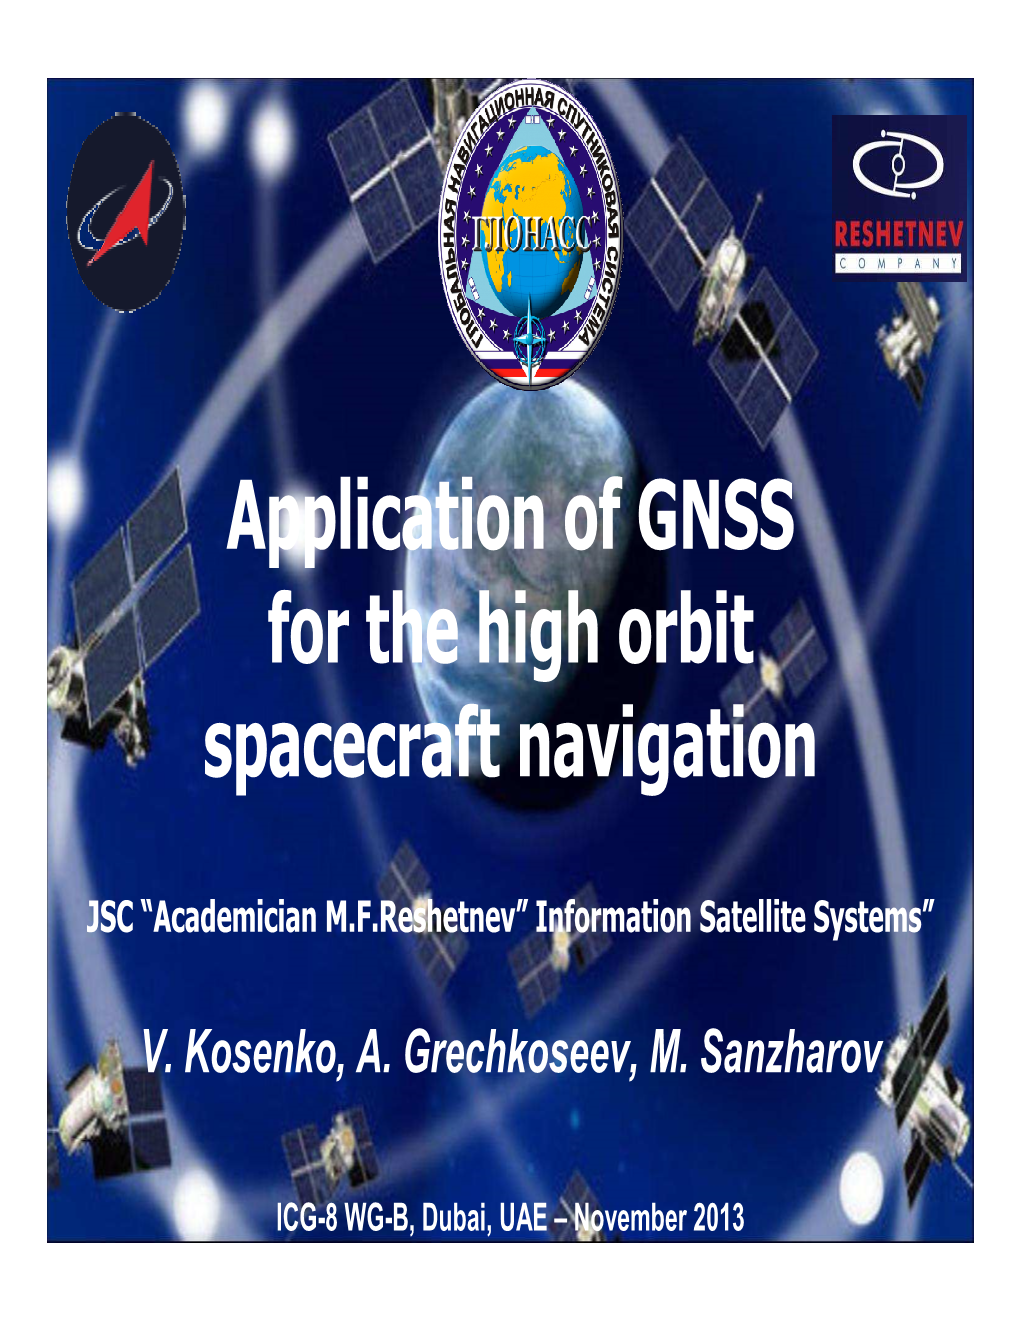 Application of GNSS for the High Orbit Spacecraft Navigation